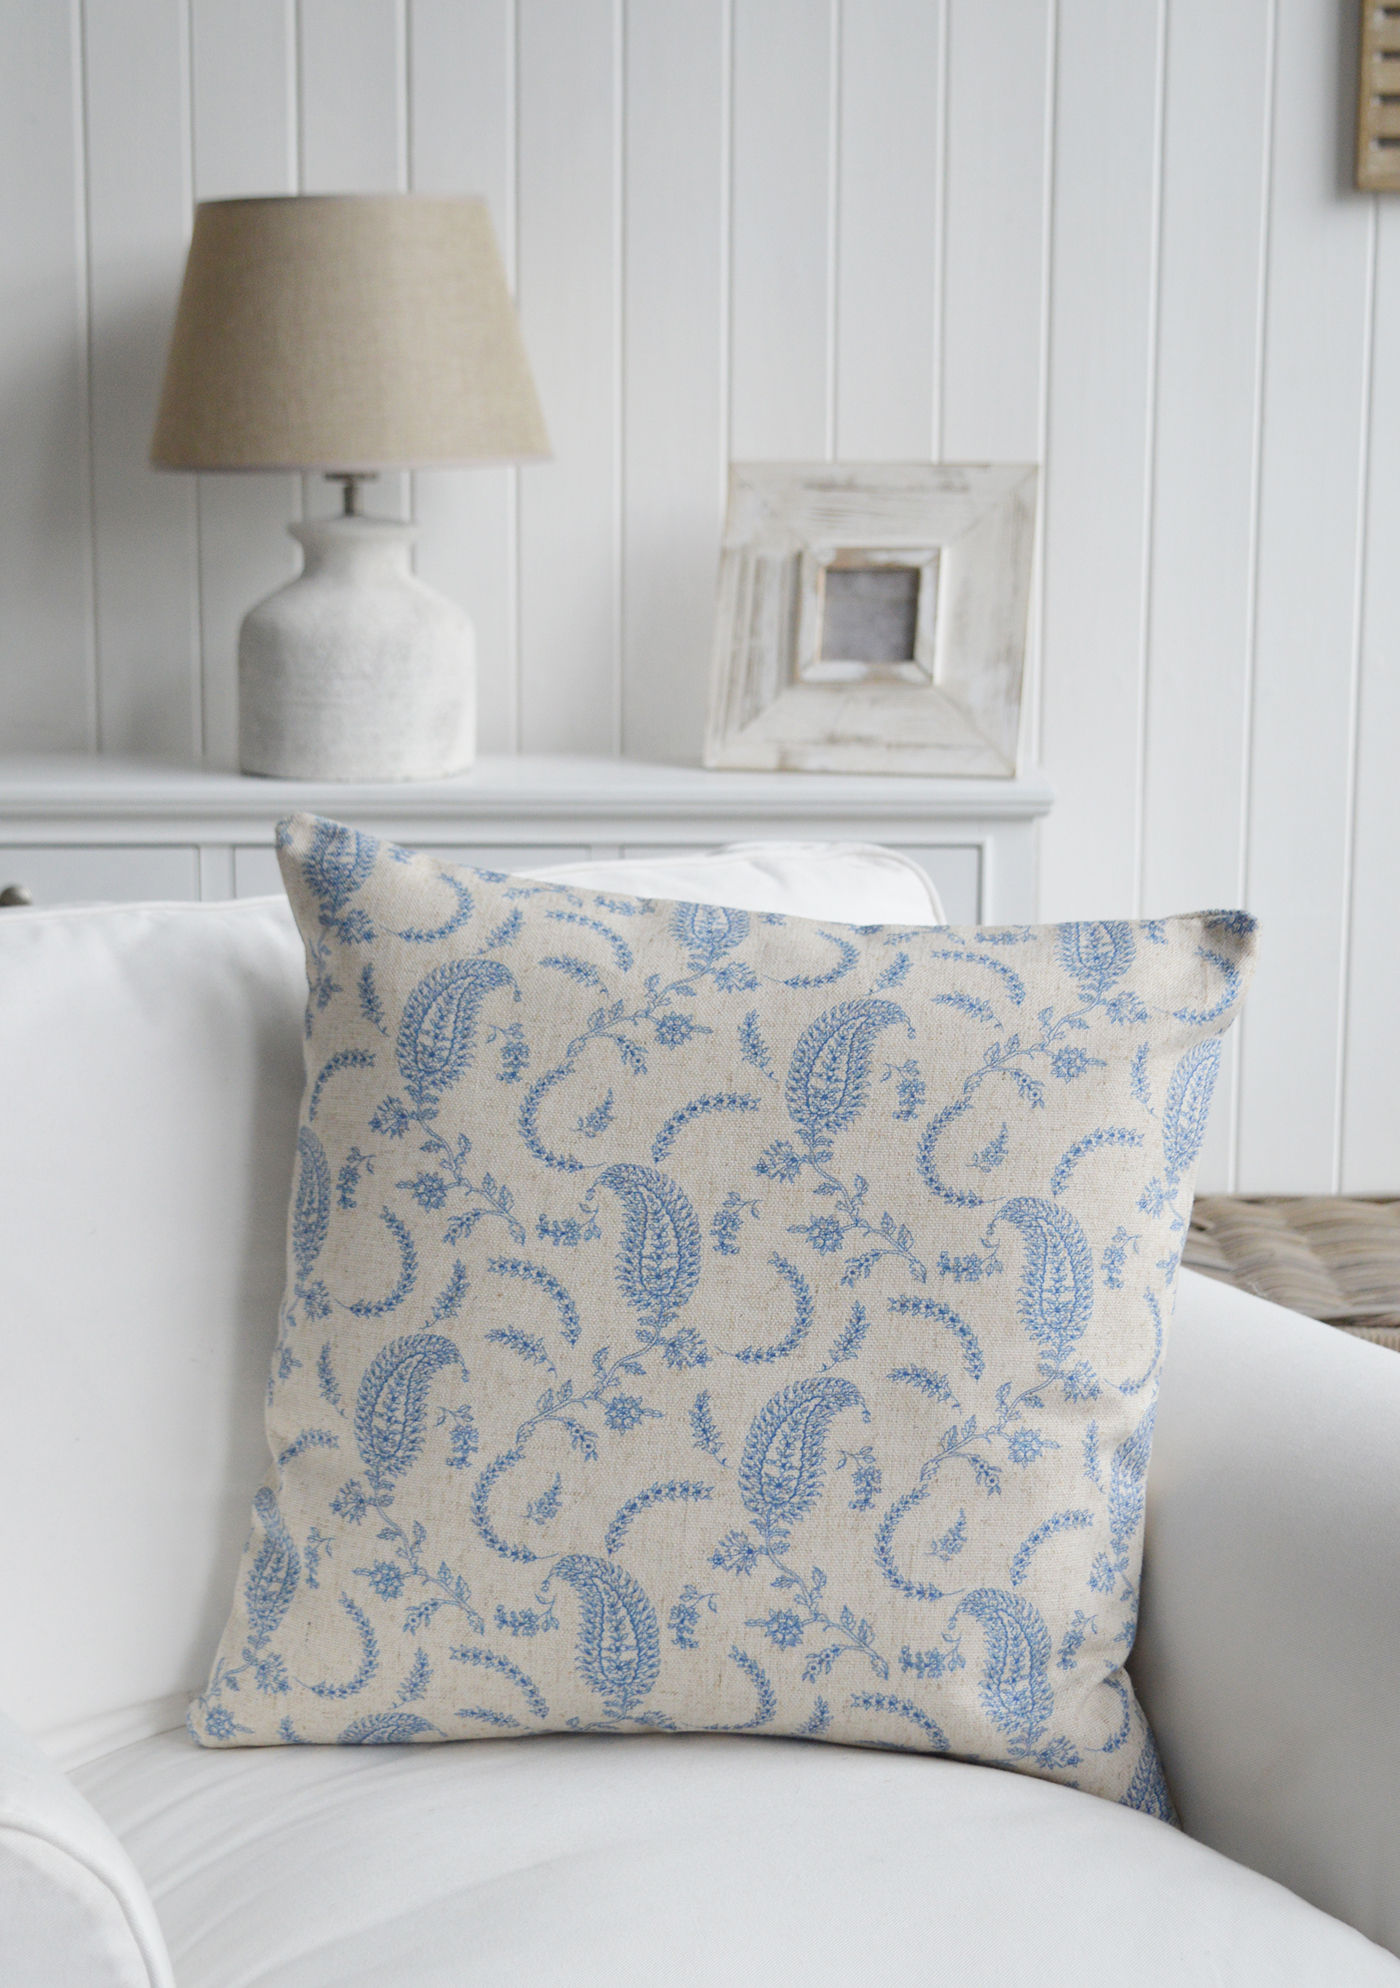 New England style furniture and home interiors for coastal, country and farmhouse interior design - Range of cushions - Piermont